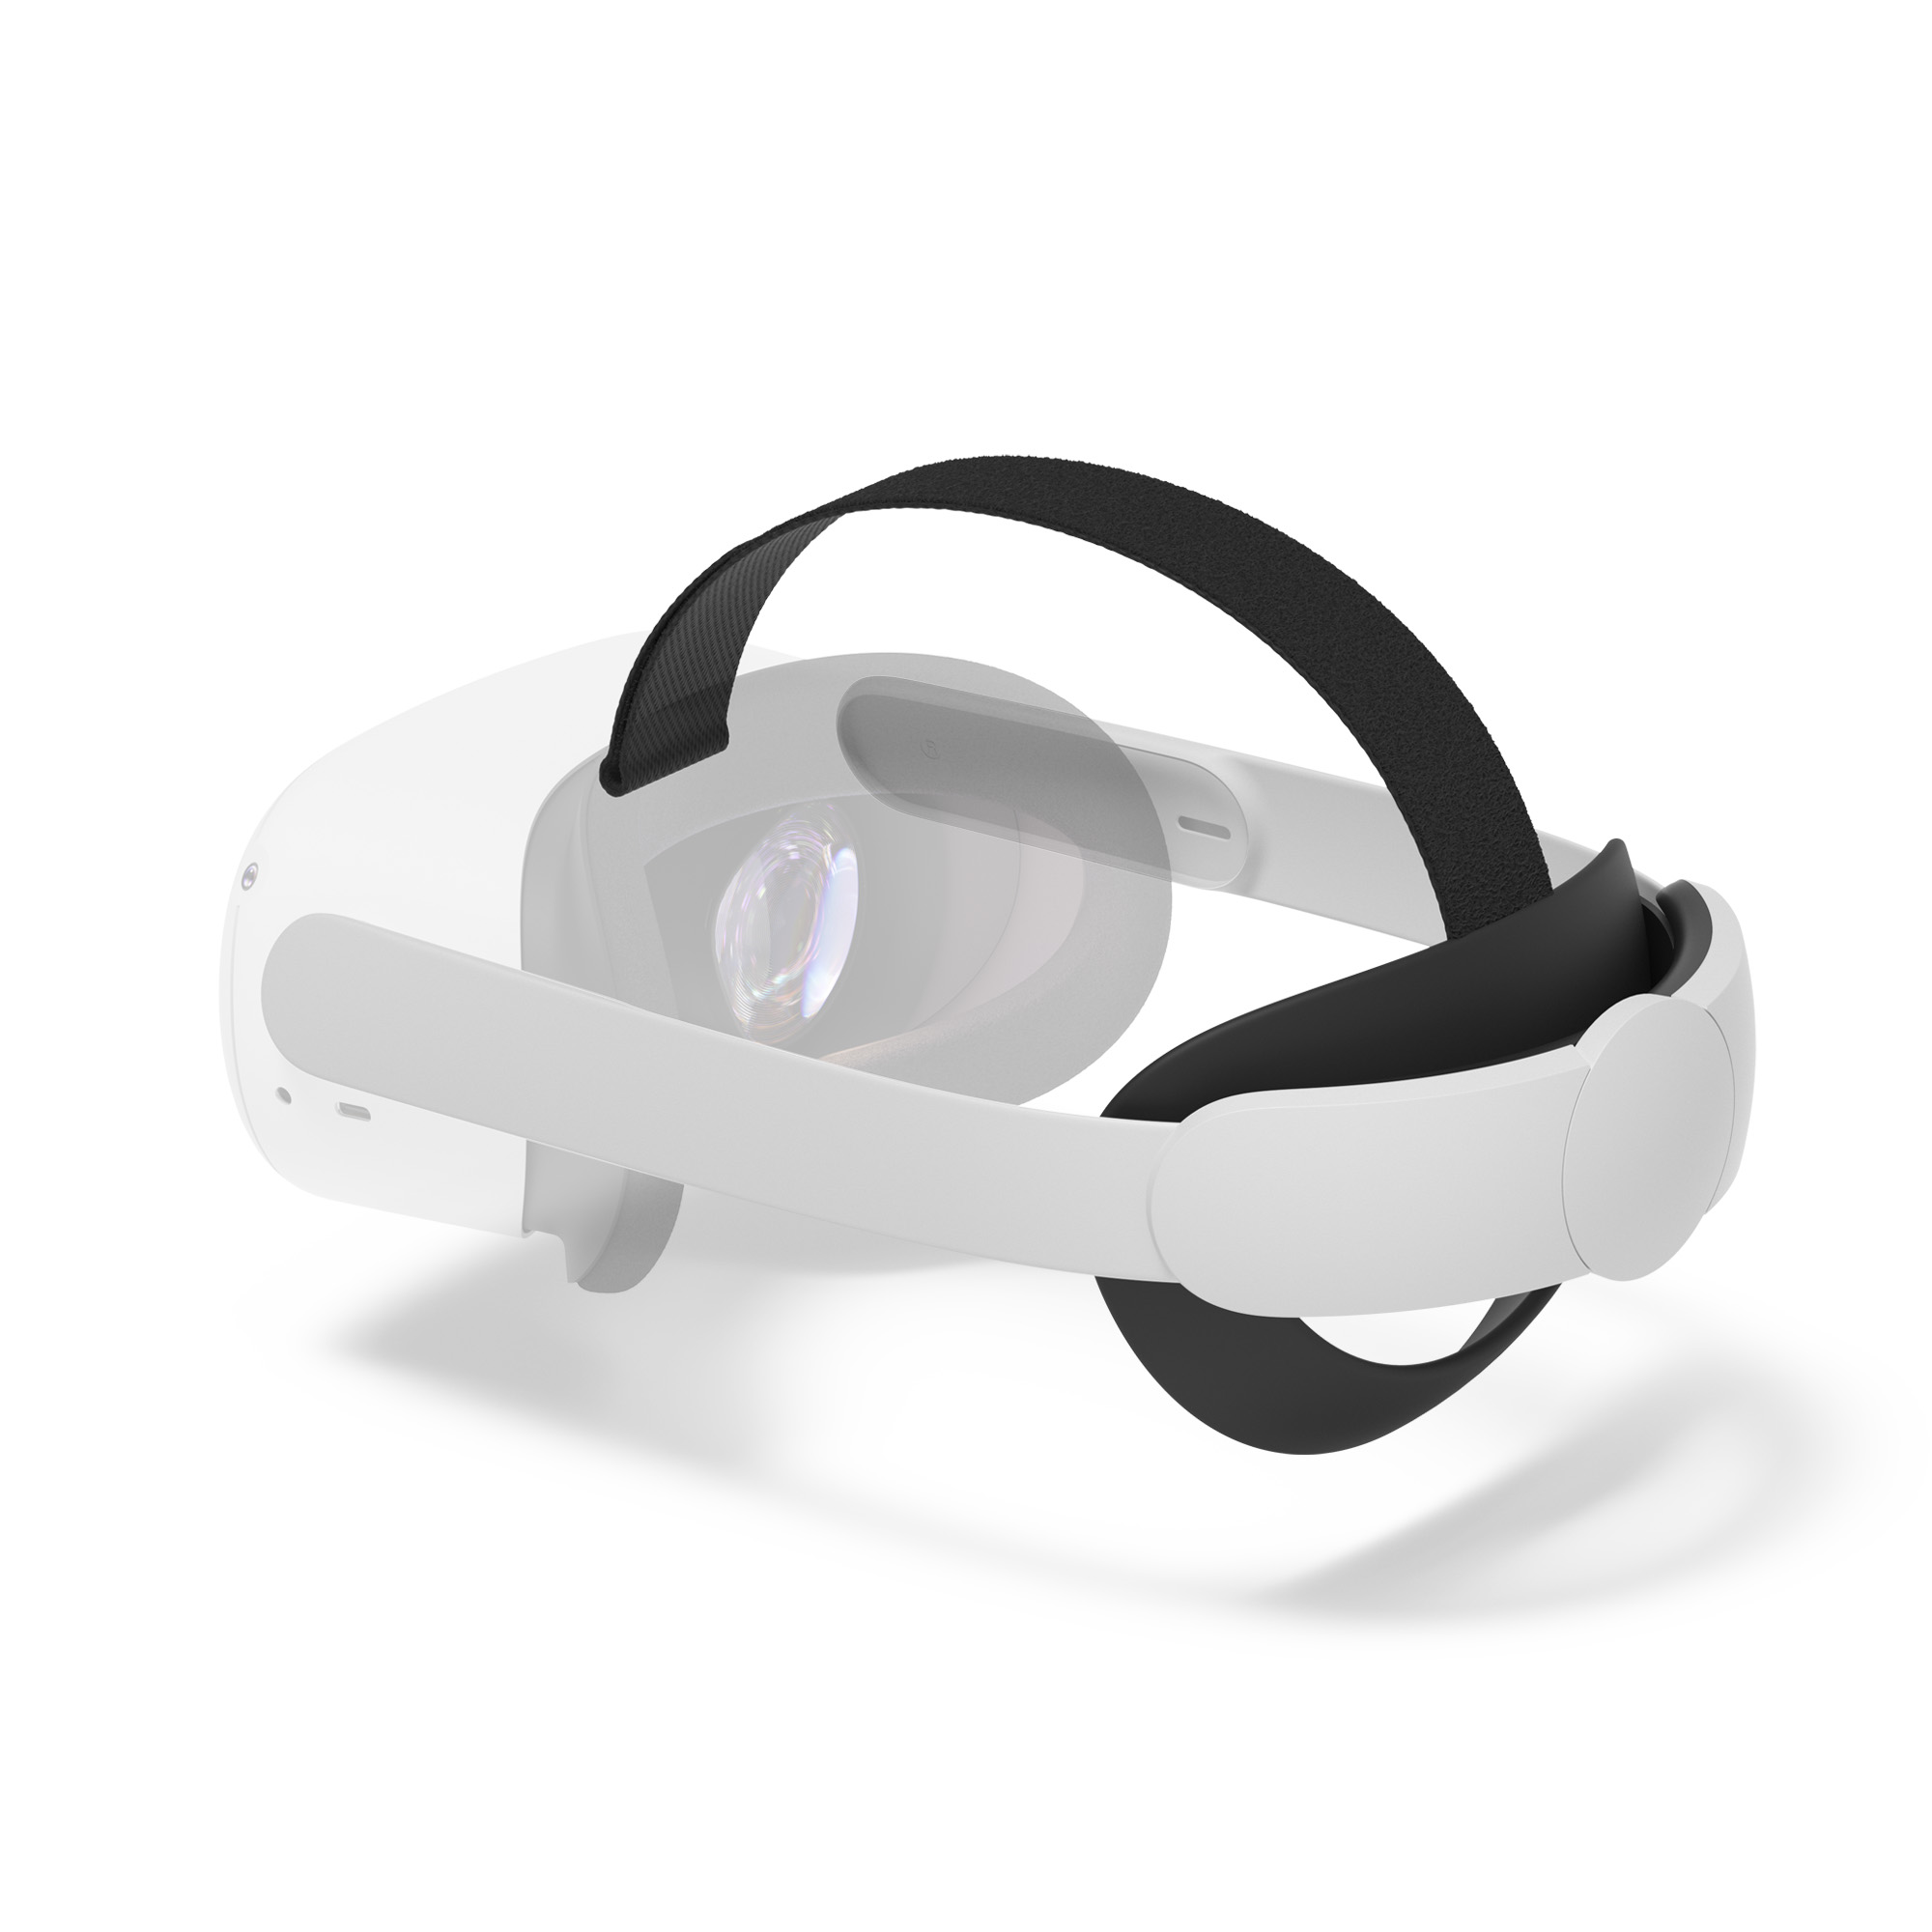 Quest 2 (Oculus) Elite Strap for Enhanced Support and Comfort in VR - image 3 of 7